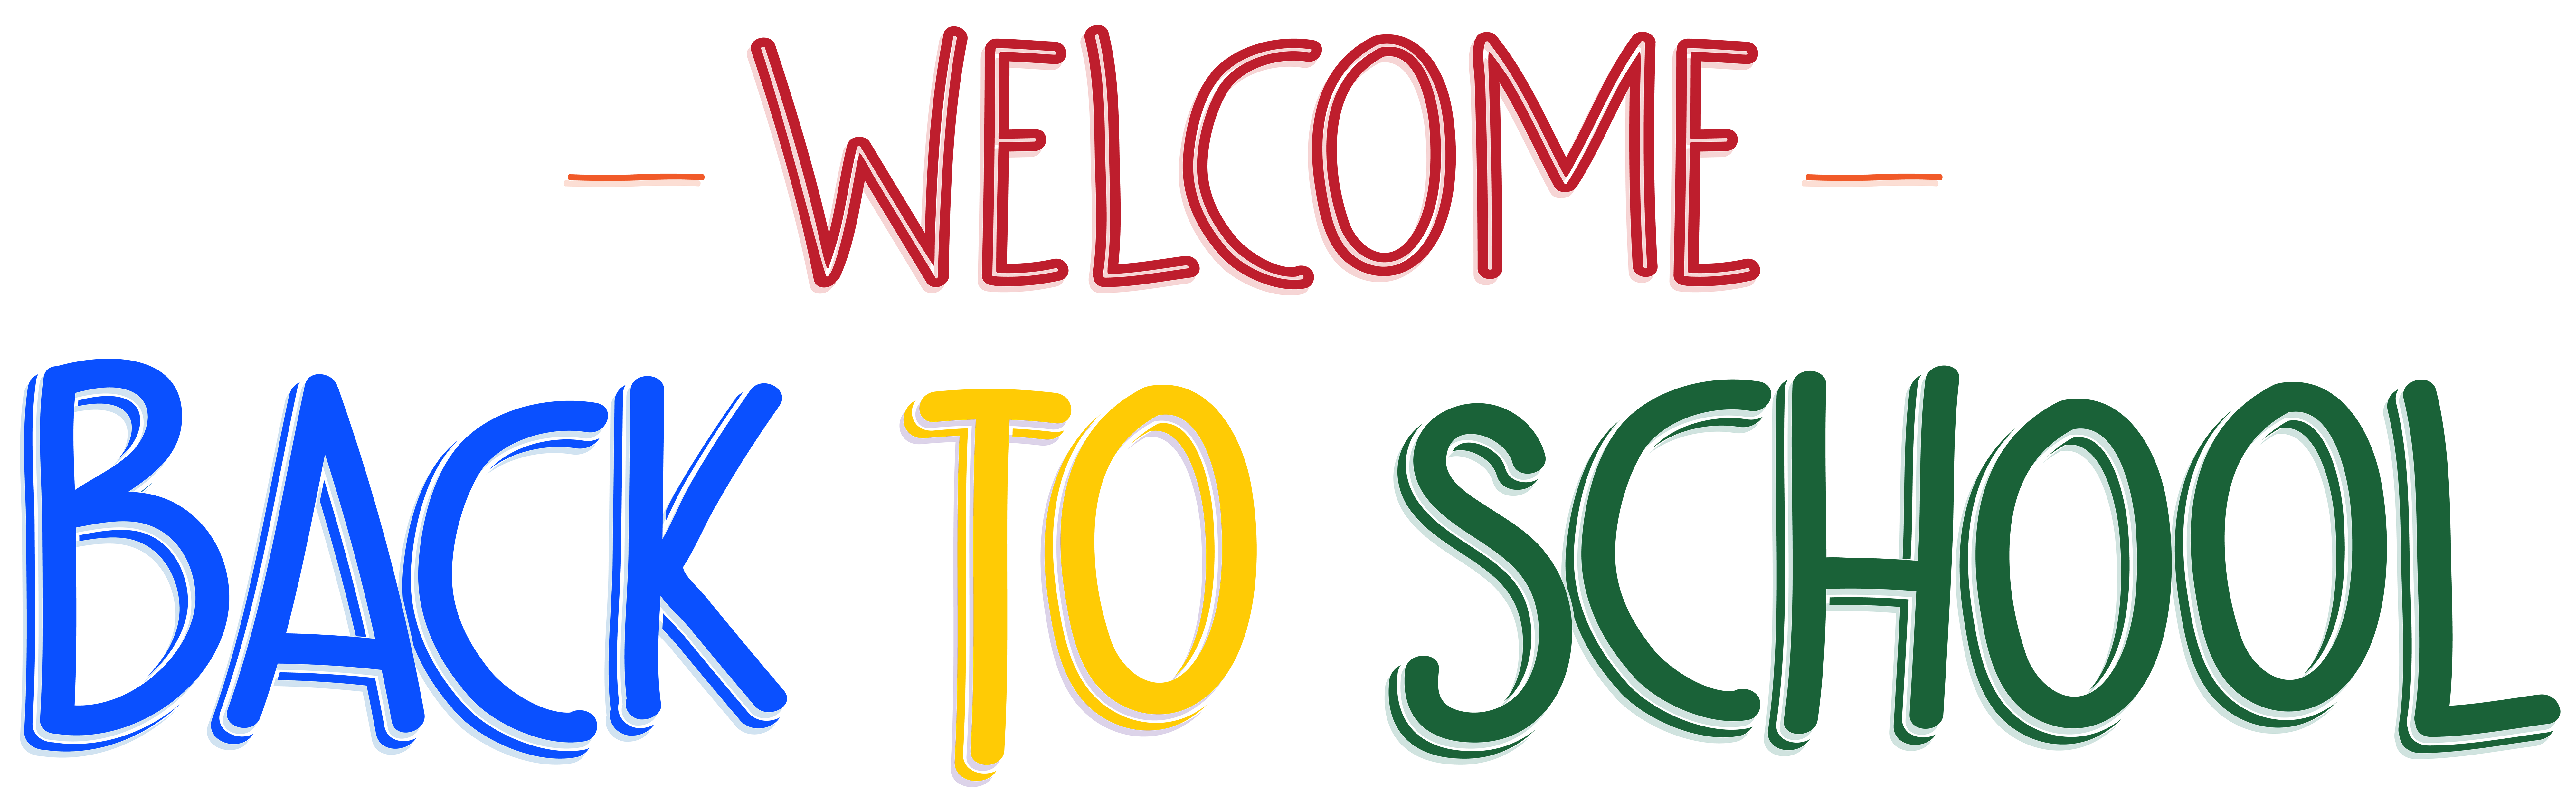 Welcome Back Signs Clipart. S